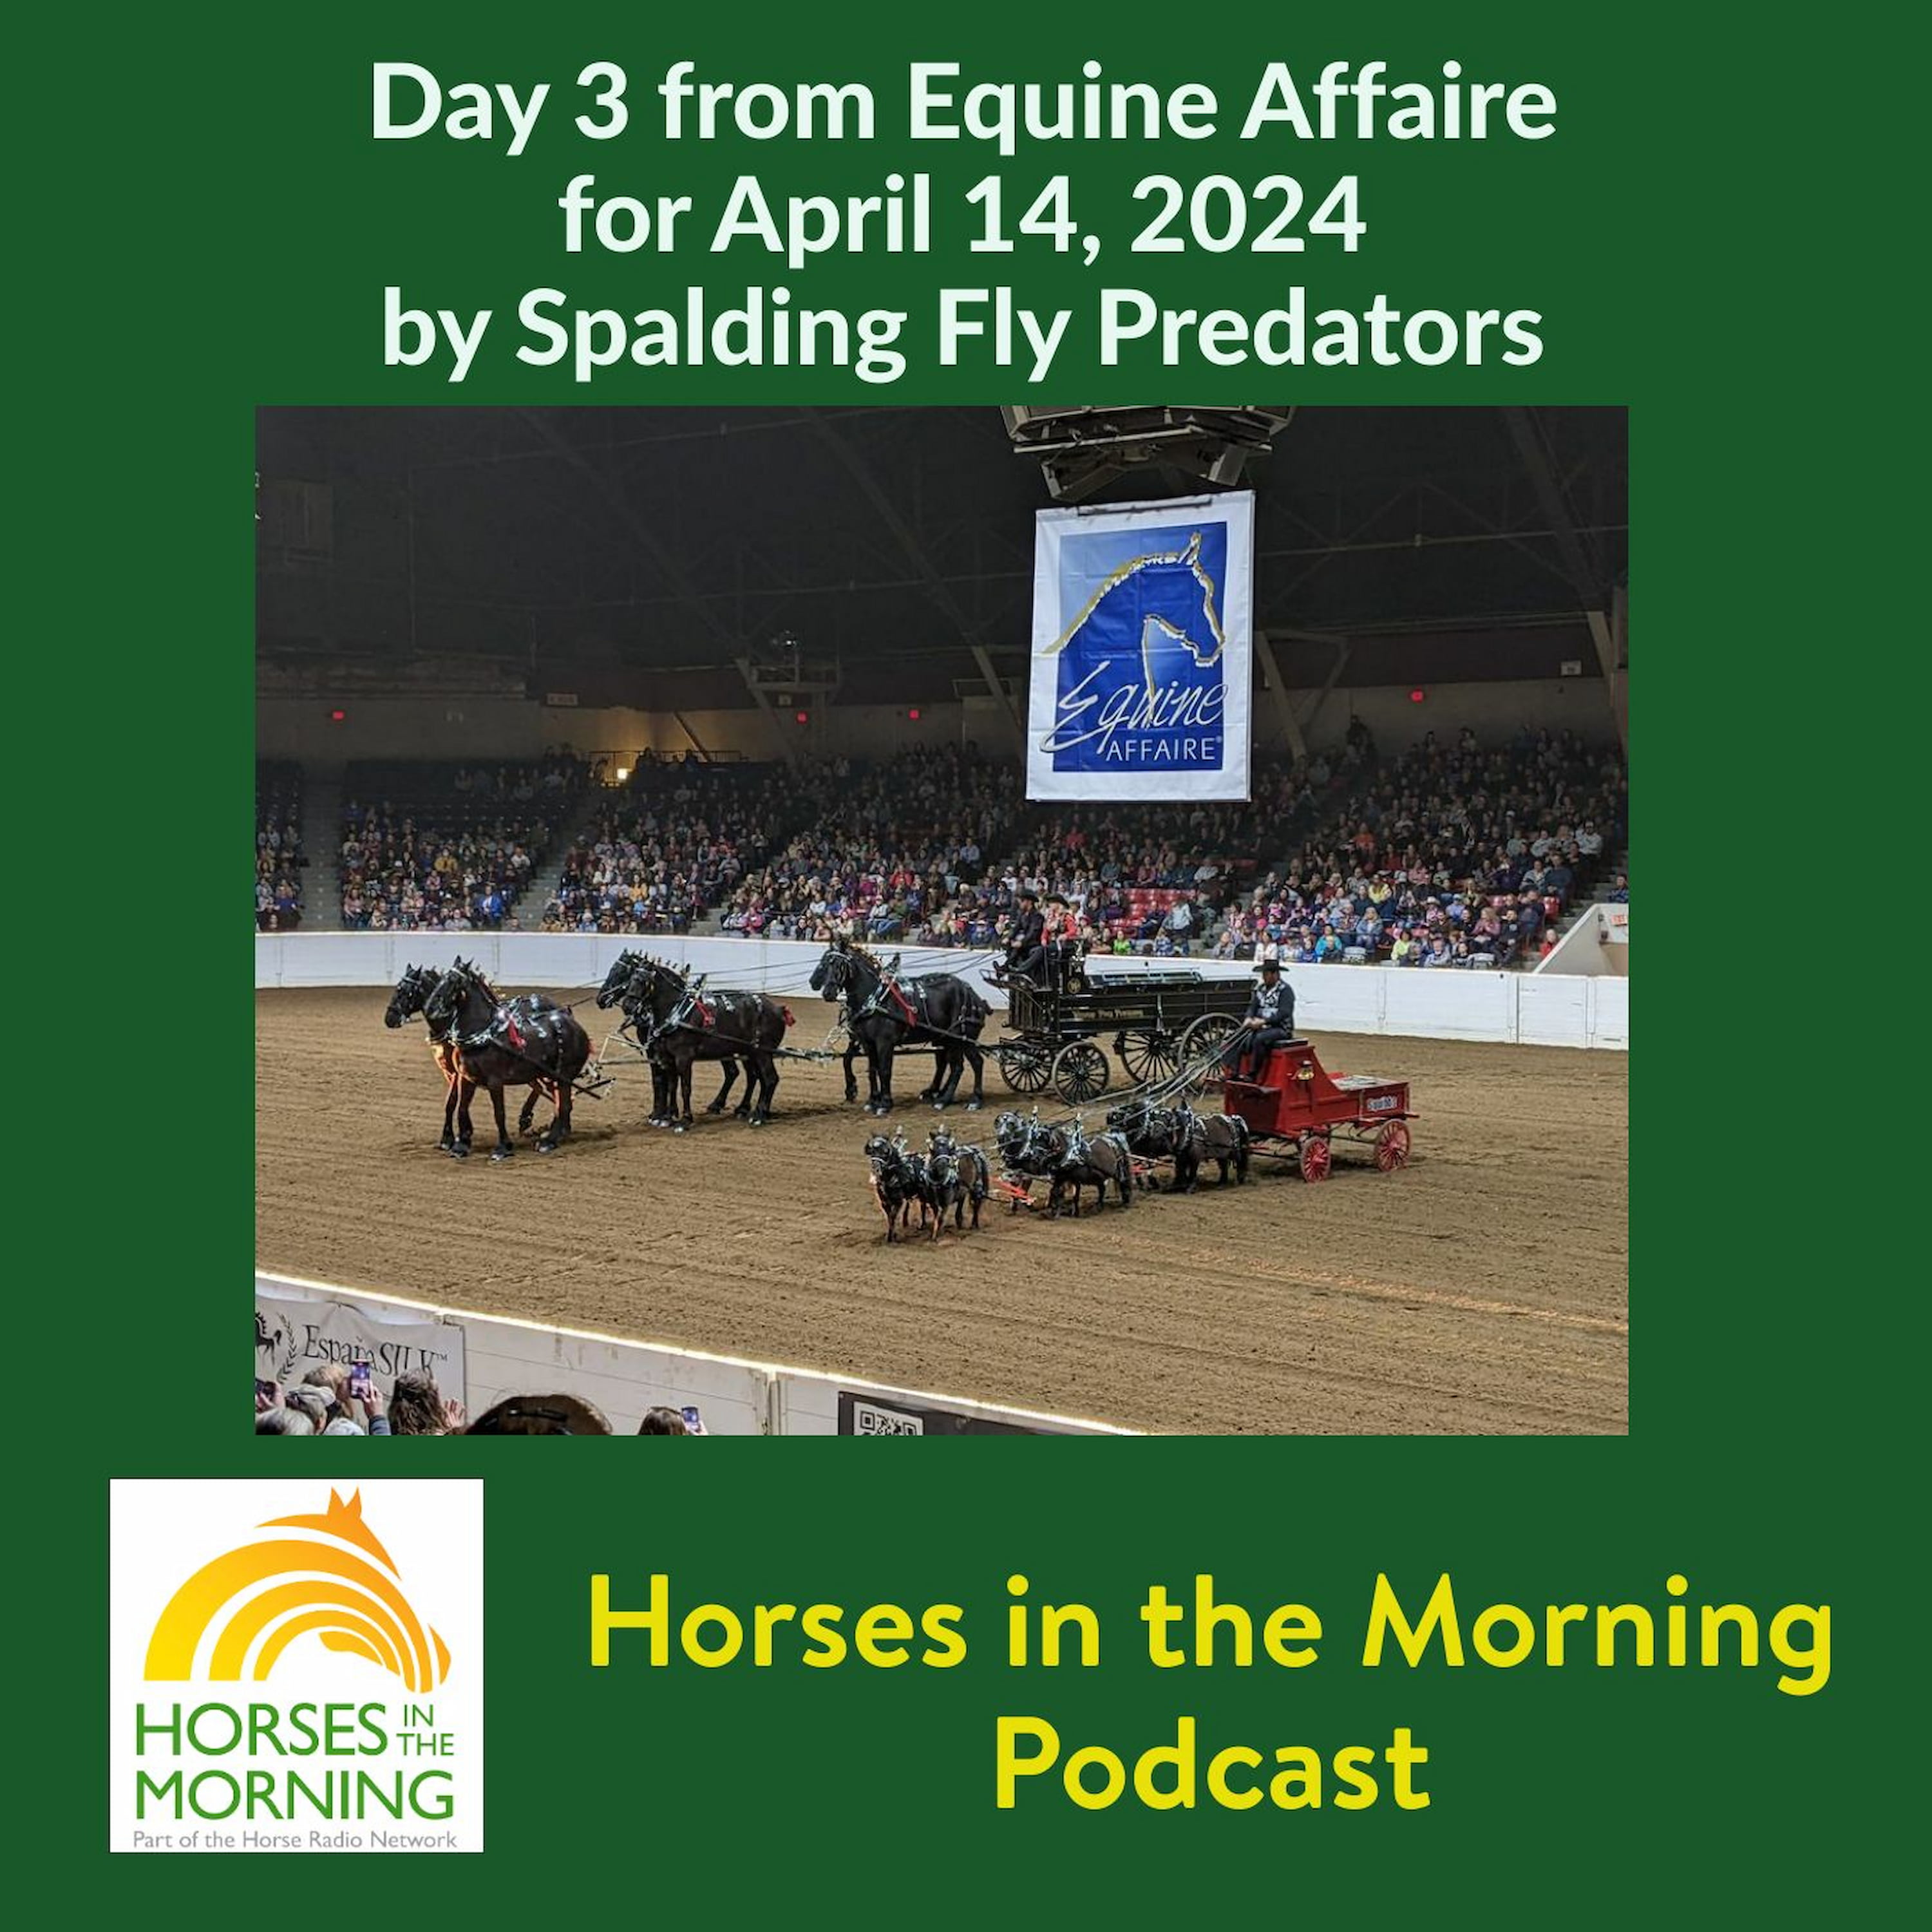 Day 3 from Equine Affaire for April 14, 2024 by Spalding Fly Predators - HORSES IN THE MORNING